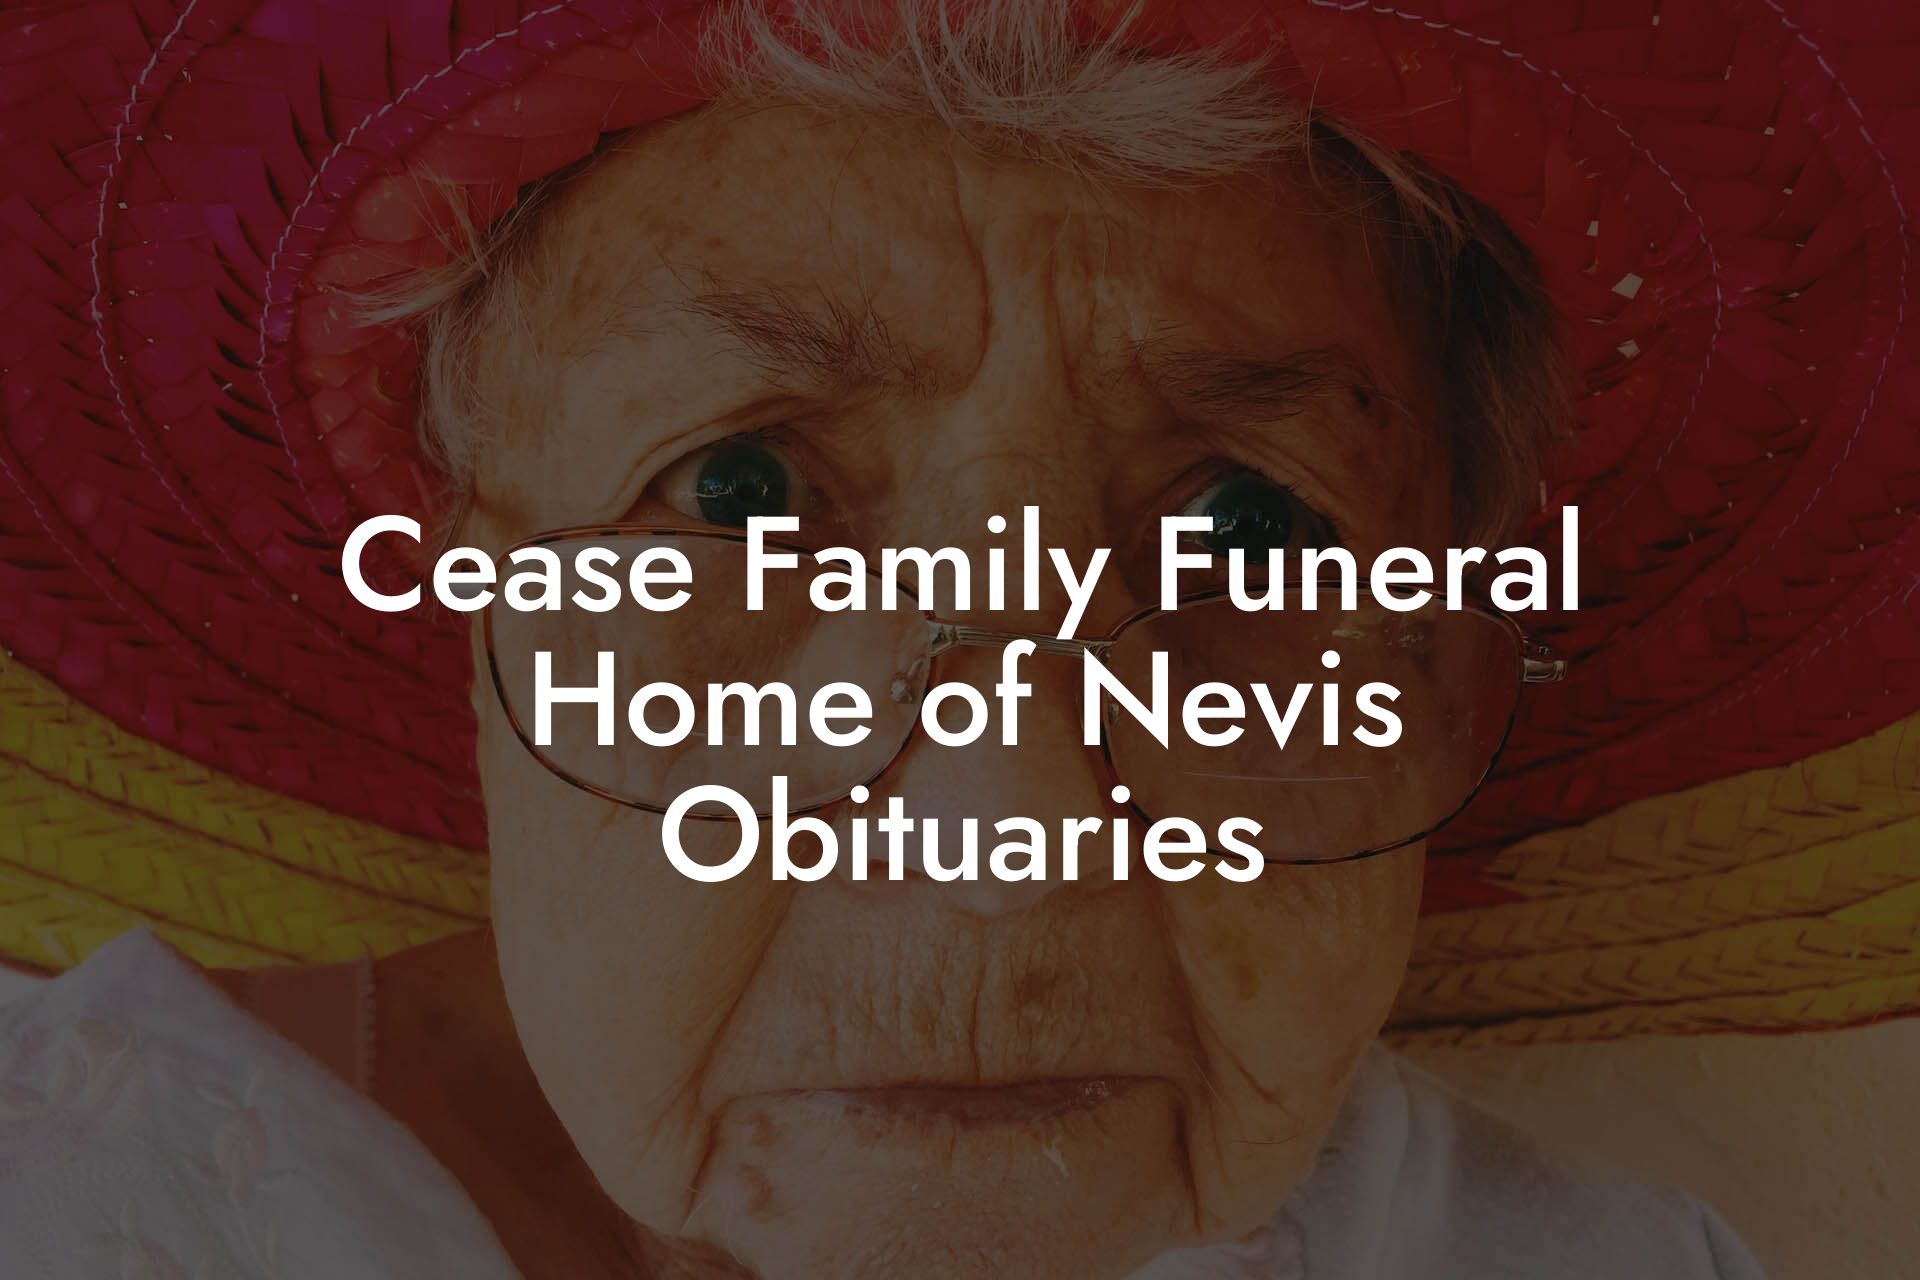 Cease Family Funeral Home of Nevis Obituaries